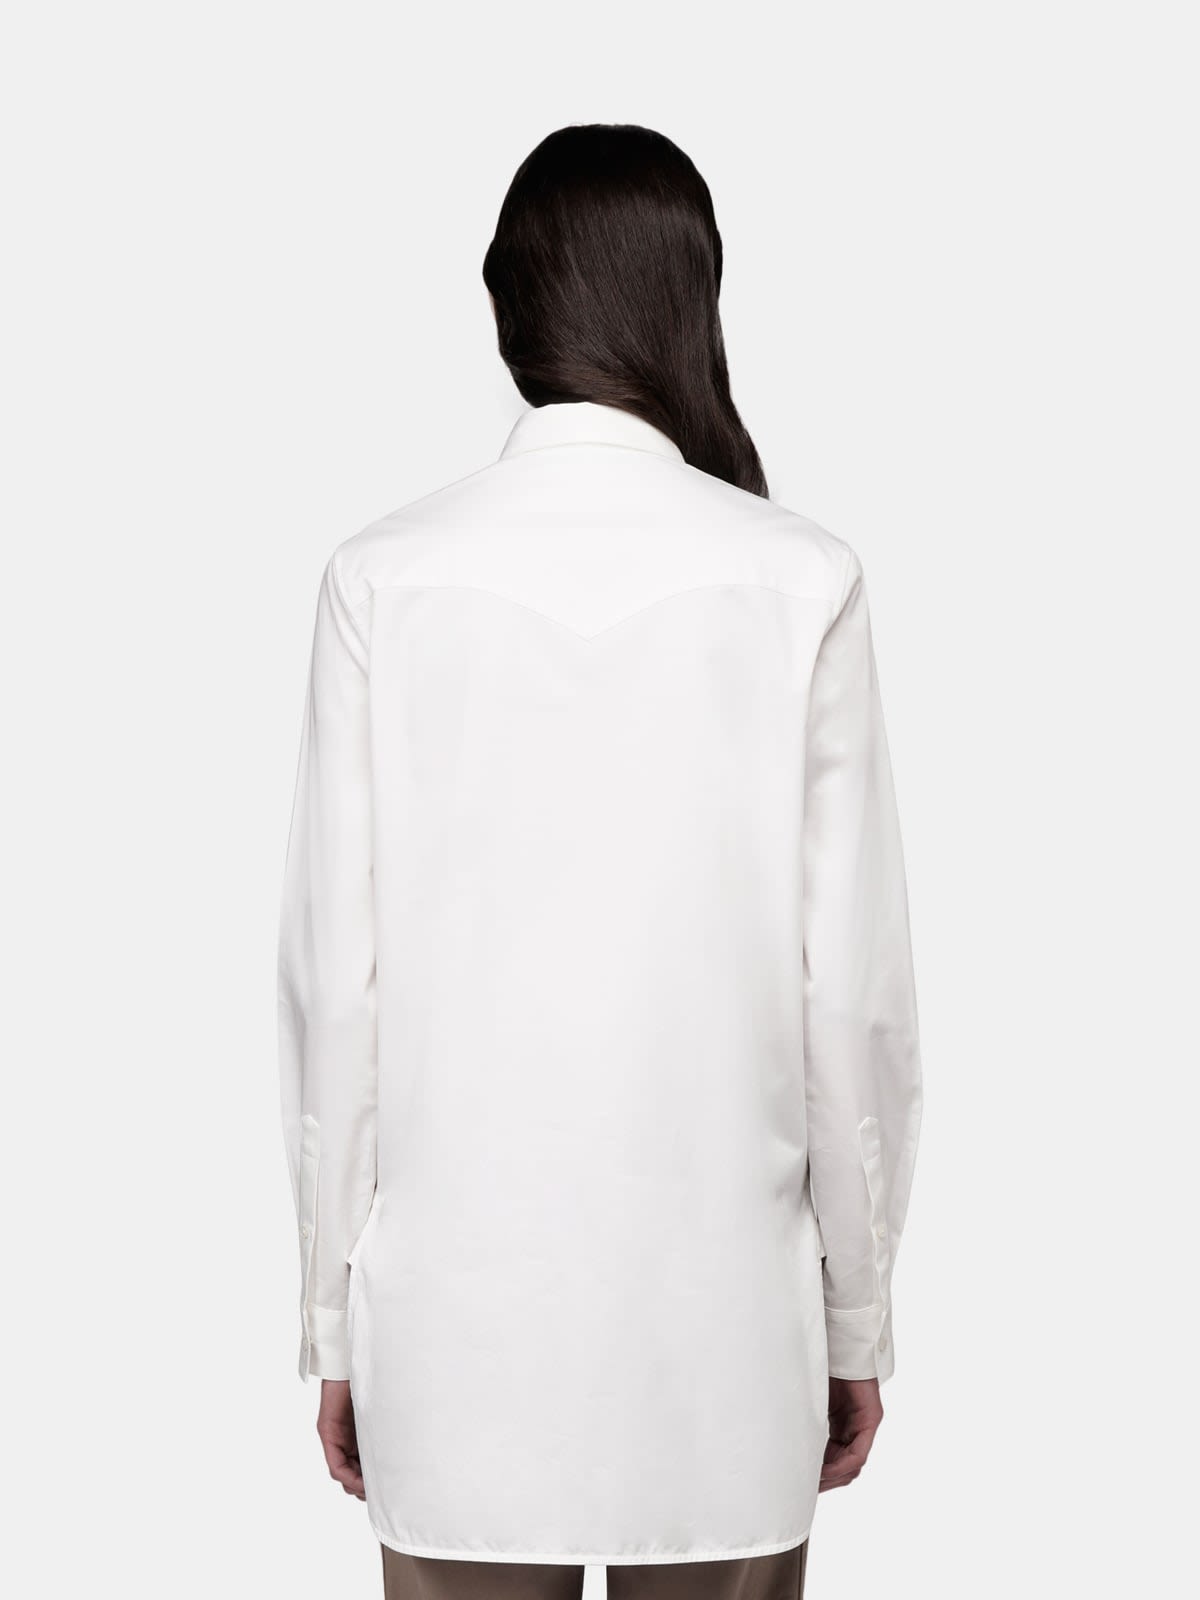 Alice popilin shirt in white with gold leaf embroidery